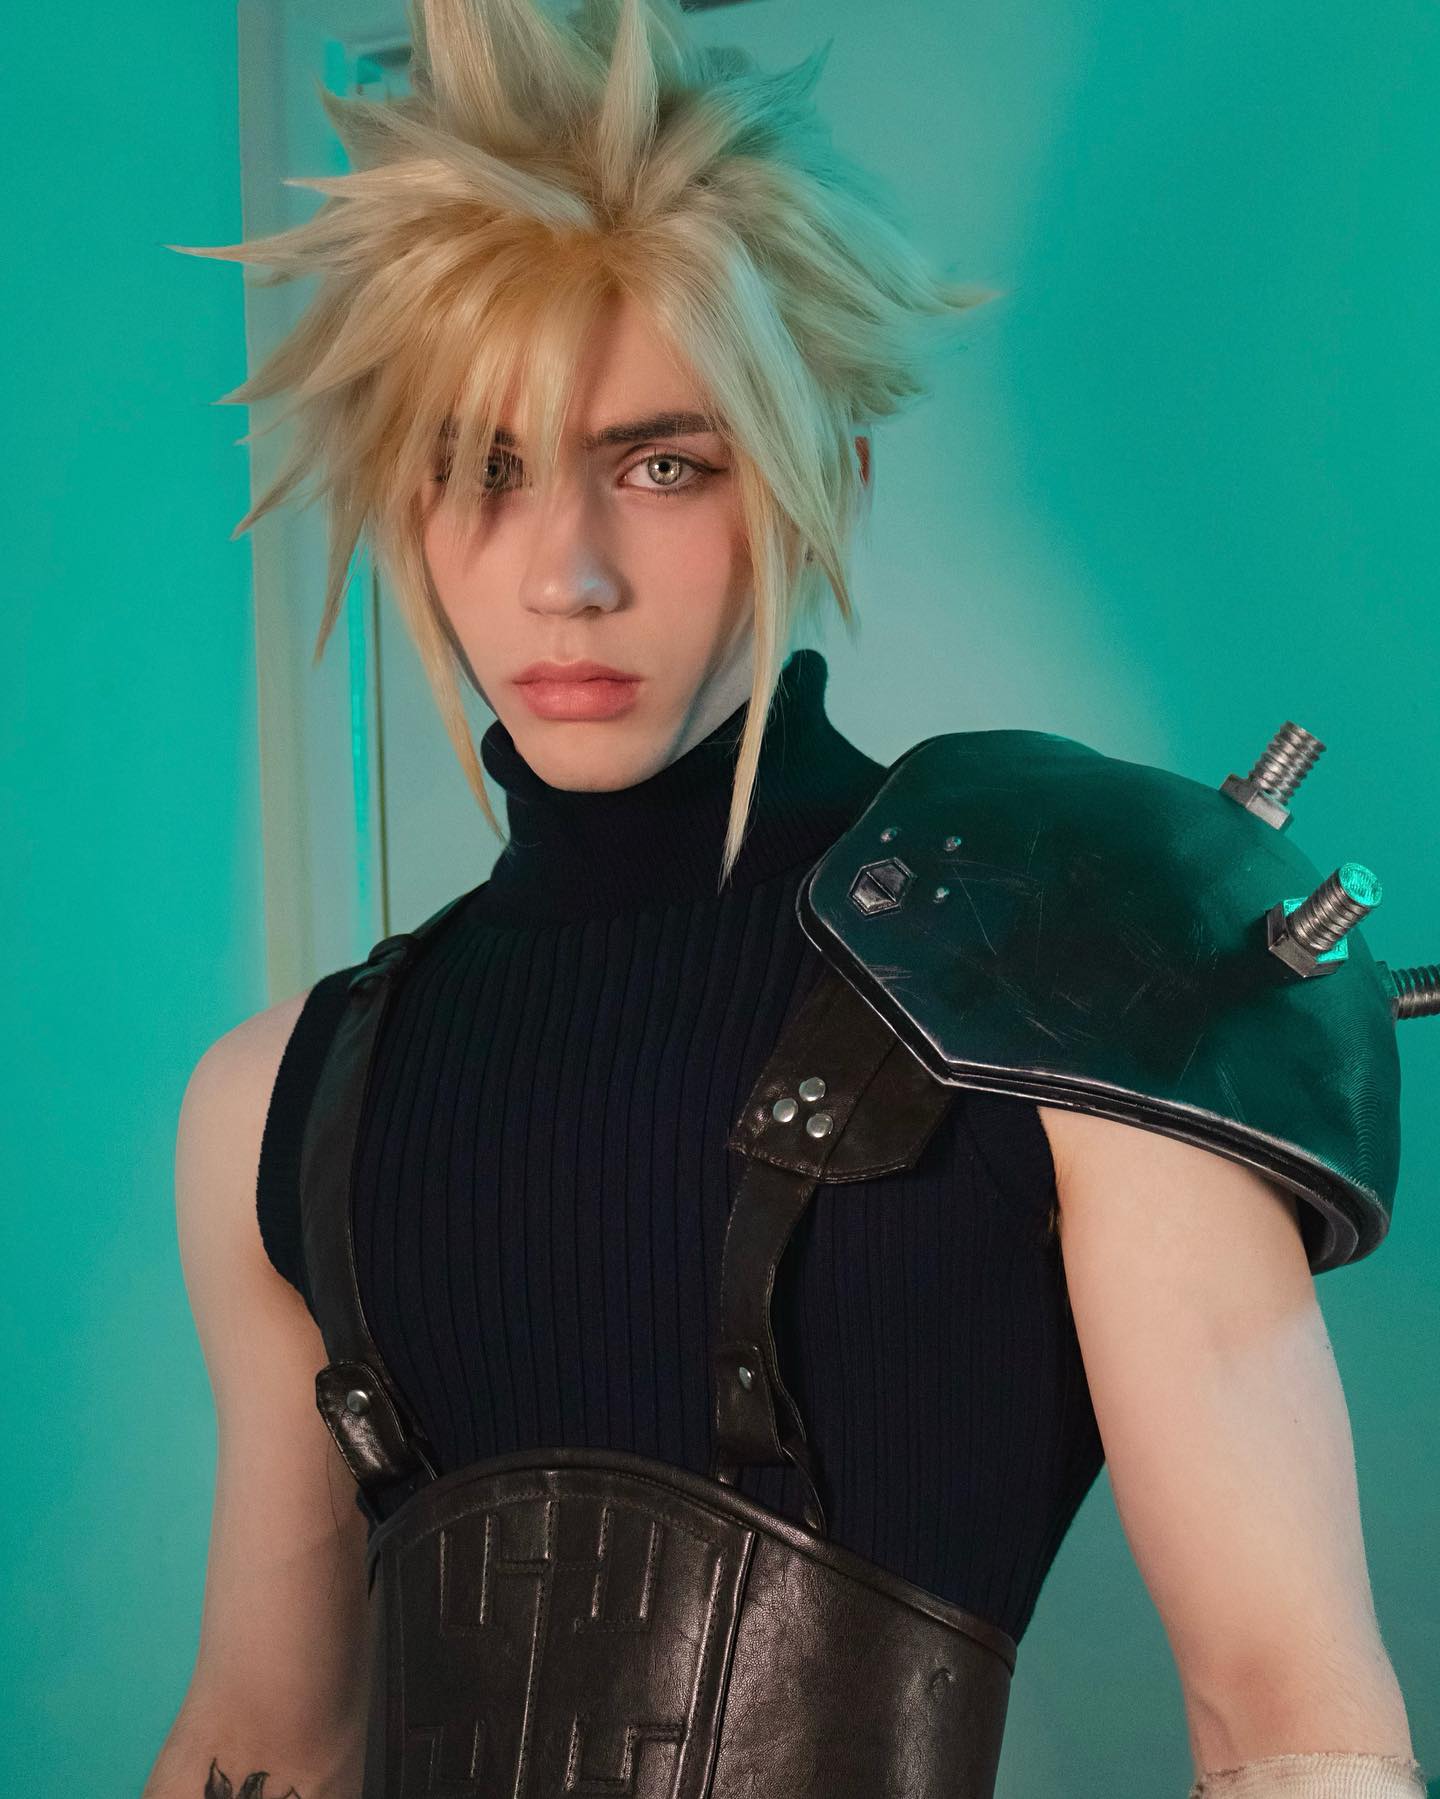 Forgot to post these Cloud Strife pics, im very excited for Comic Con LA, still working on this cosplay until then… #finalfantasy #cloudstrife